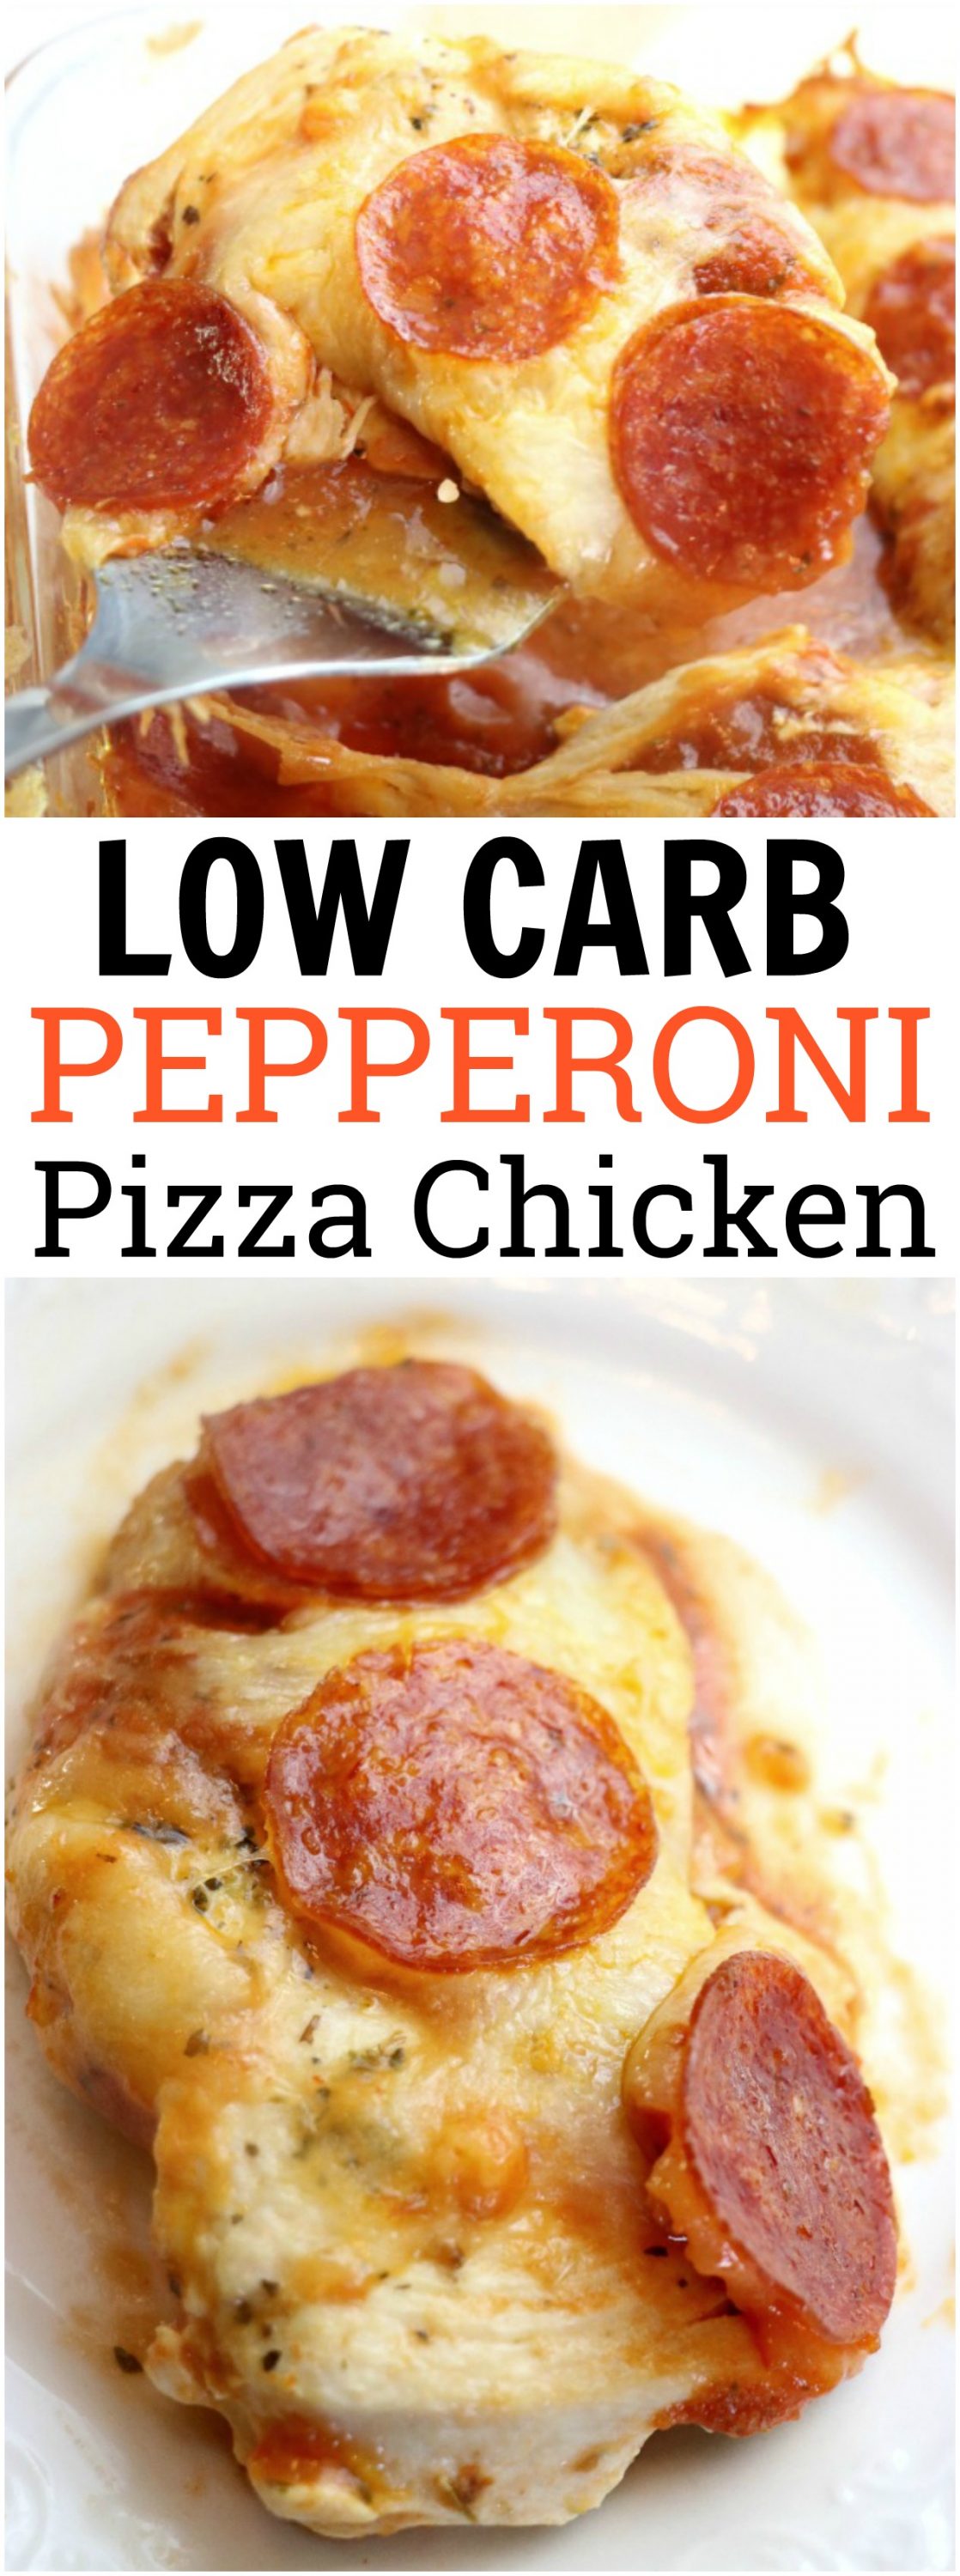 Low Carb Pepperoni Pizza